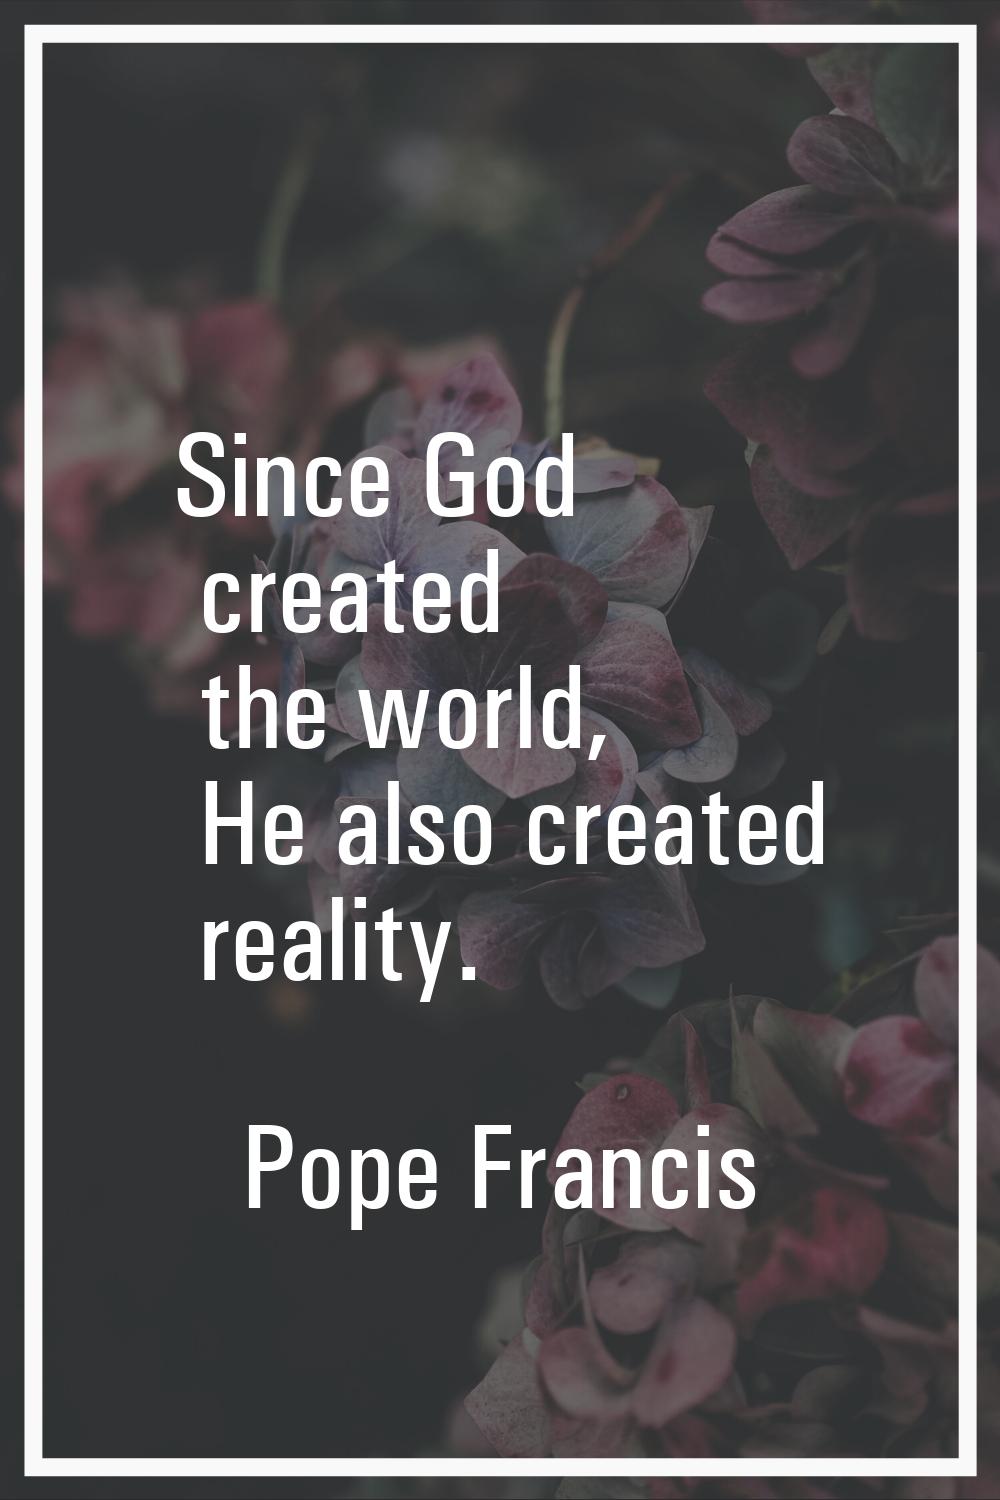 Since God created the world, He also created reality.